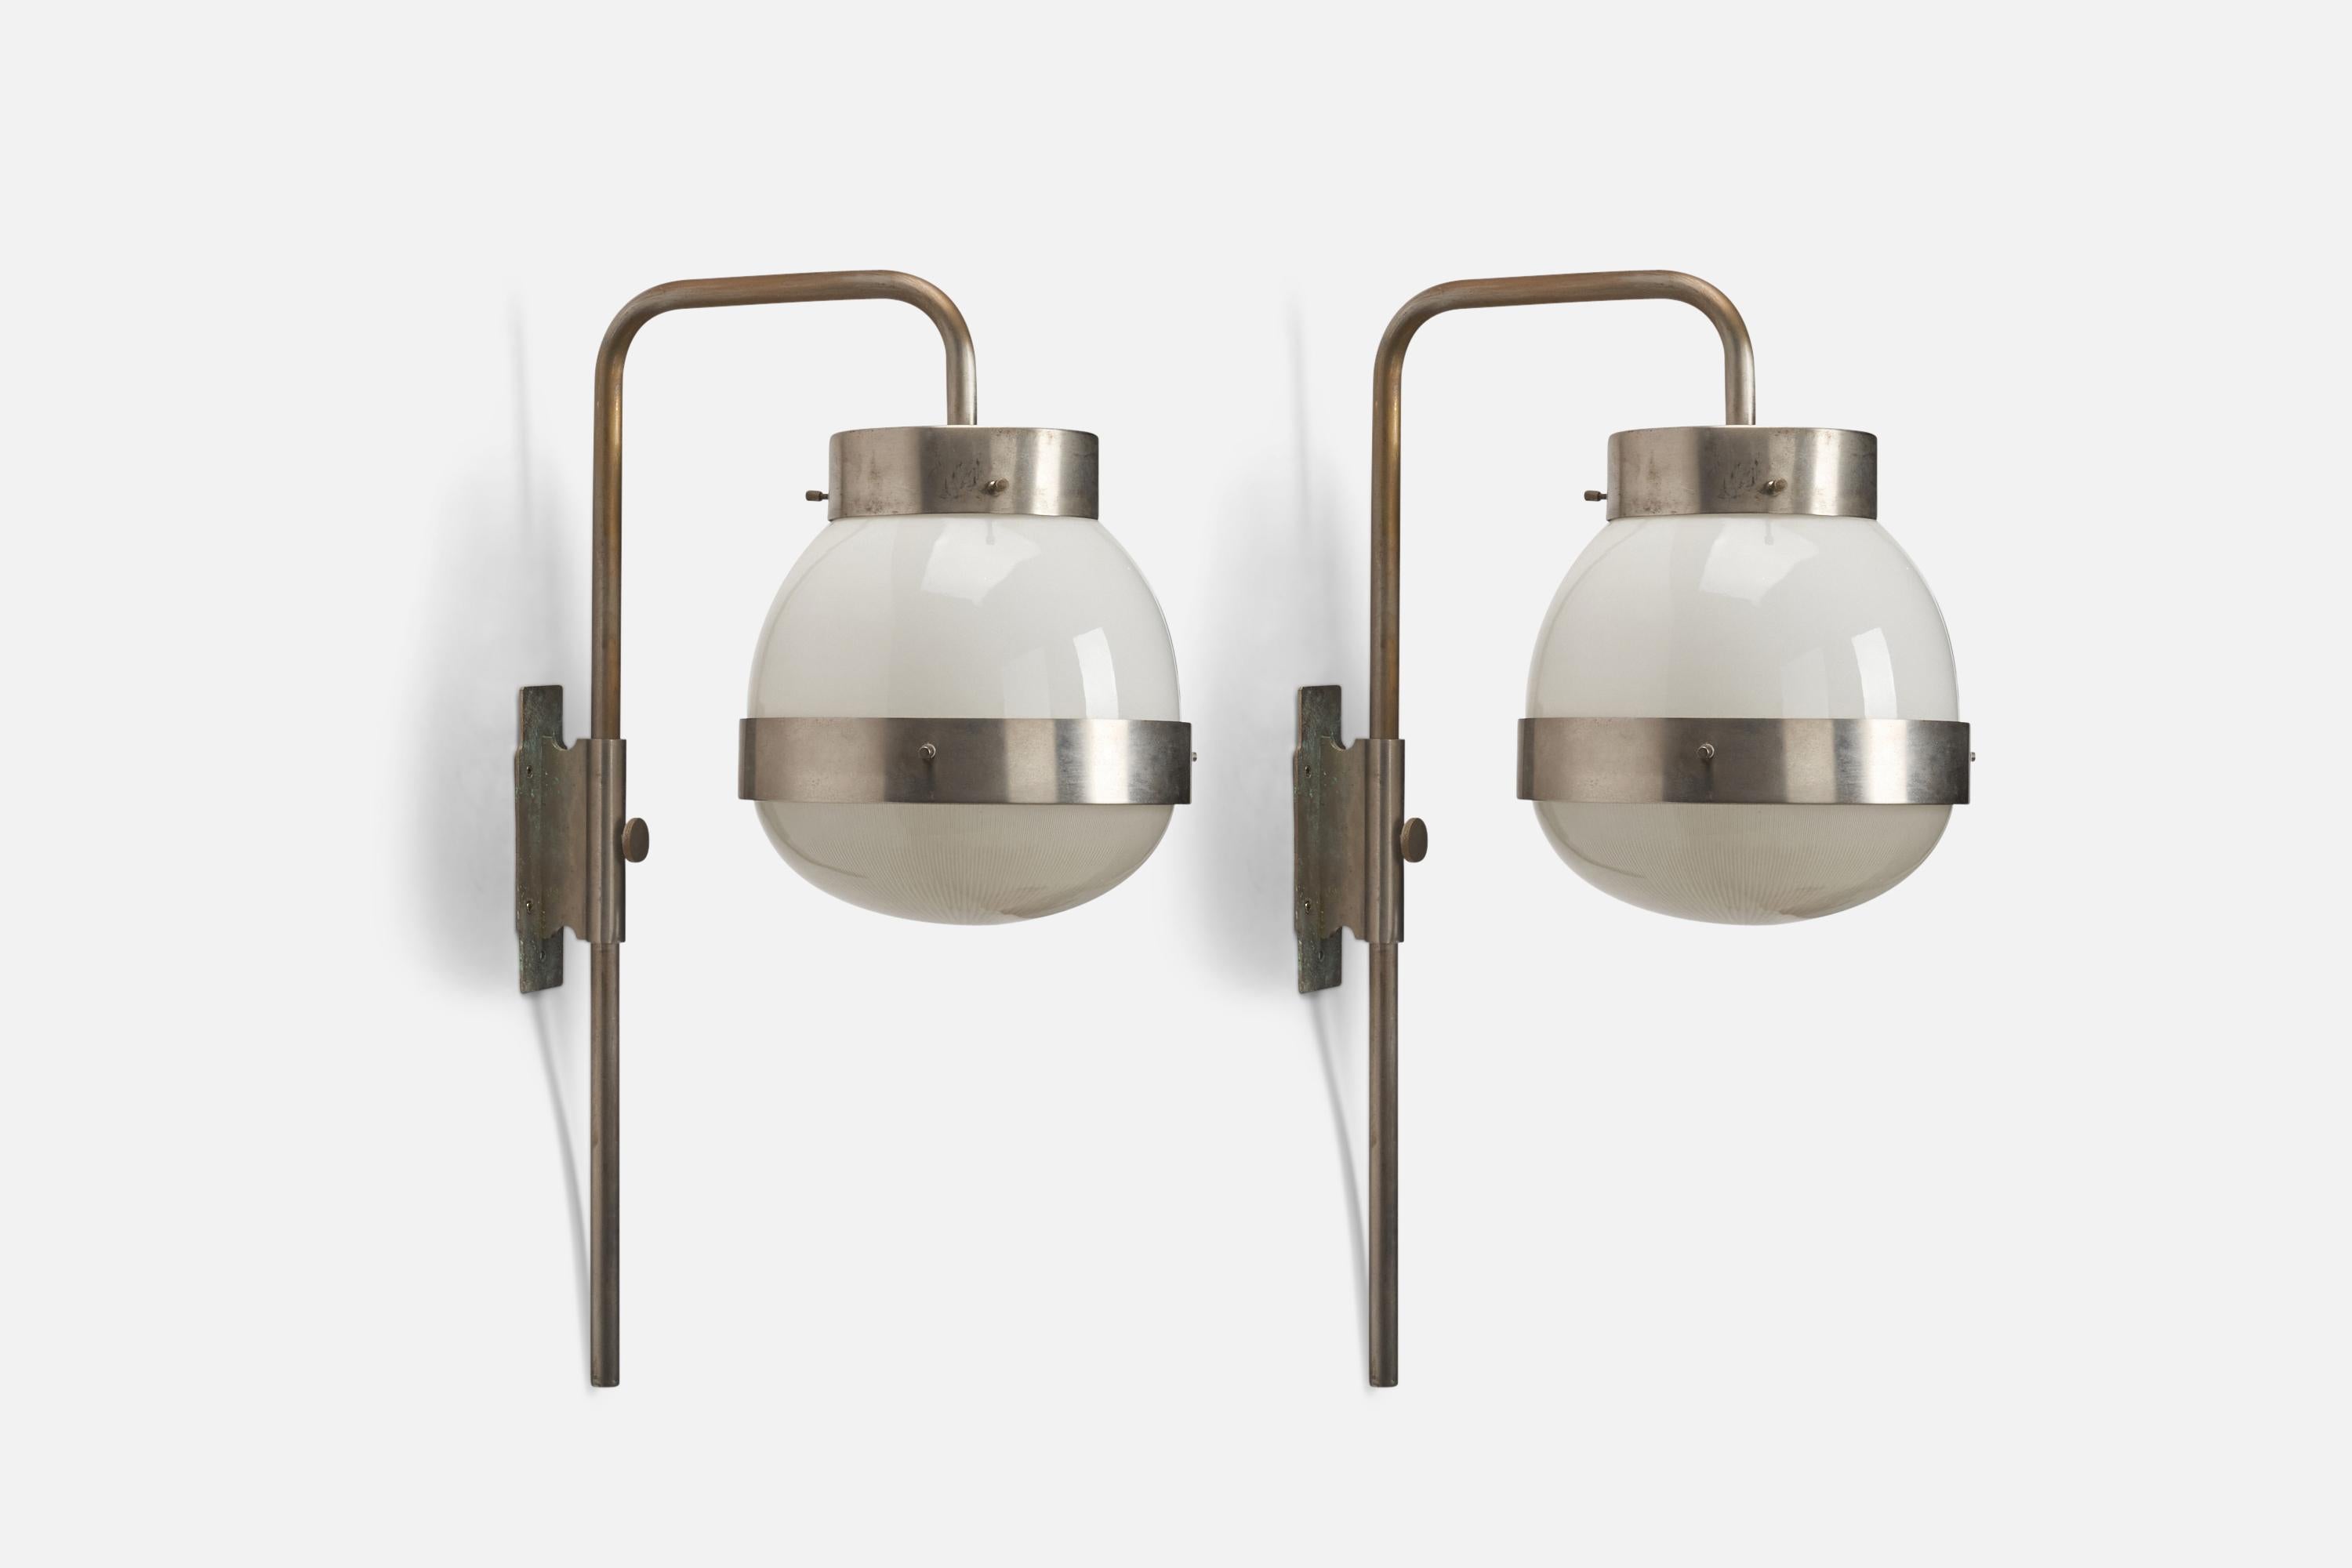 A pair of steel and glass wall lights designed by Sergio Mazza and produced by Artemide, Italy, 1960s.

Dimensions of Back Plate (inches) : 7 x 2.3 x 0.1 (Height x Width x Depth)

Sockets take standard E-26 medium base bulbs.

There is no